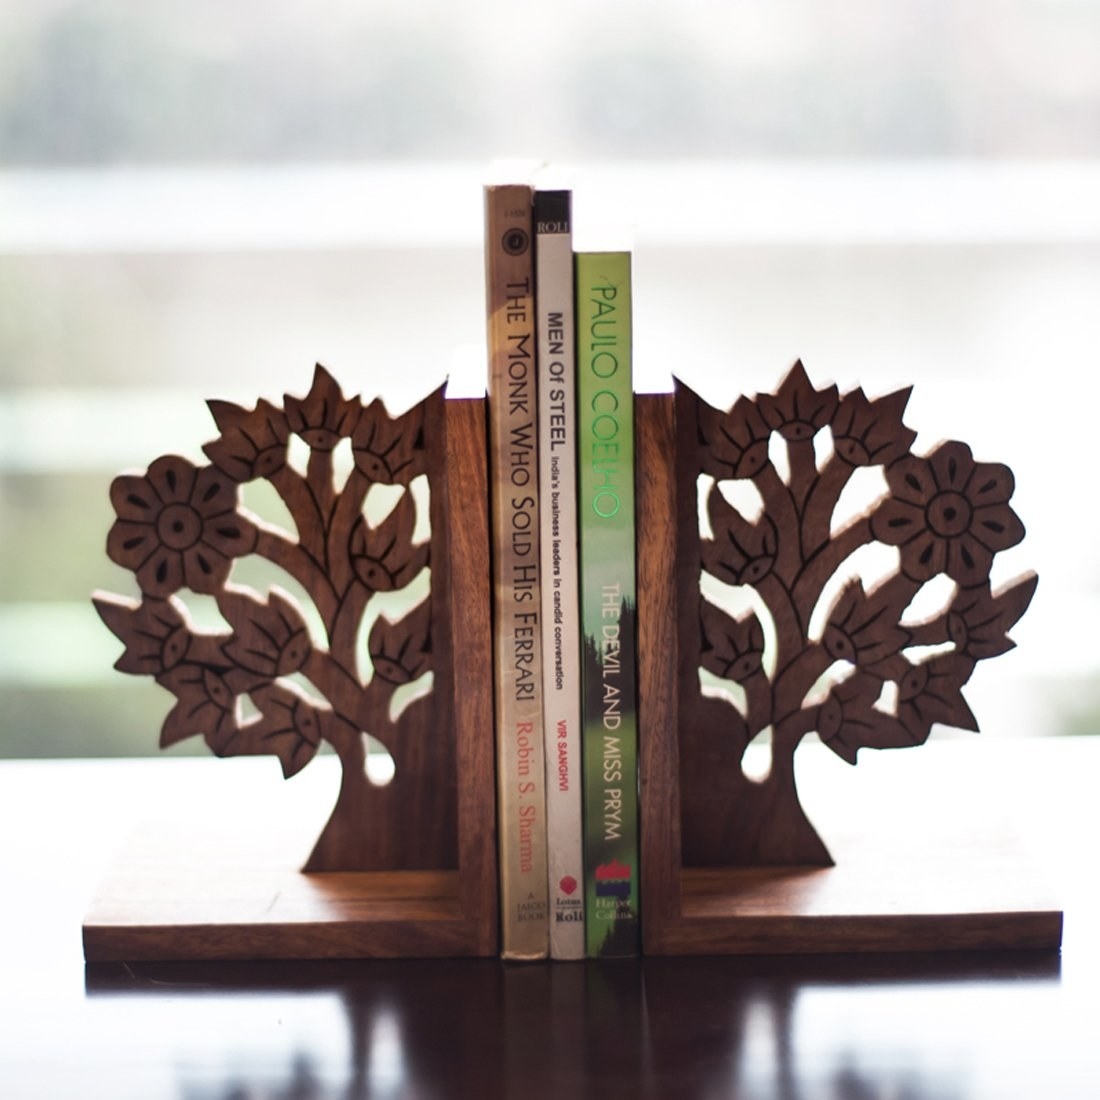 Two tree shaped bookends with books between them